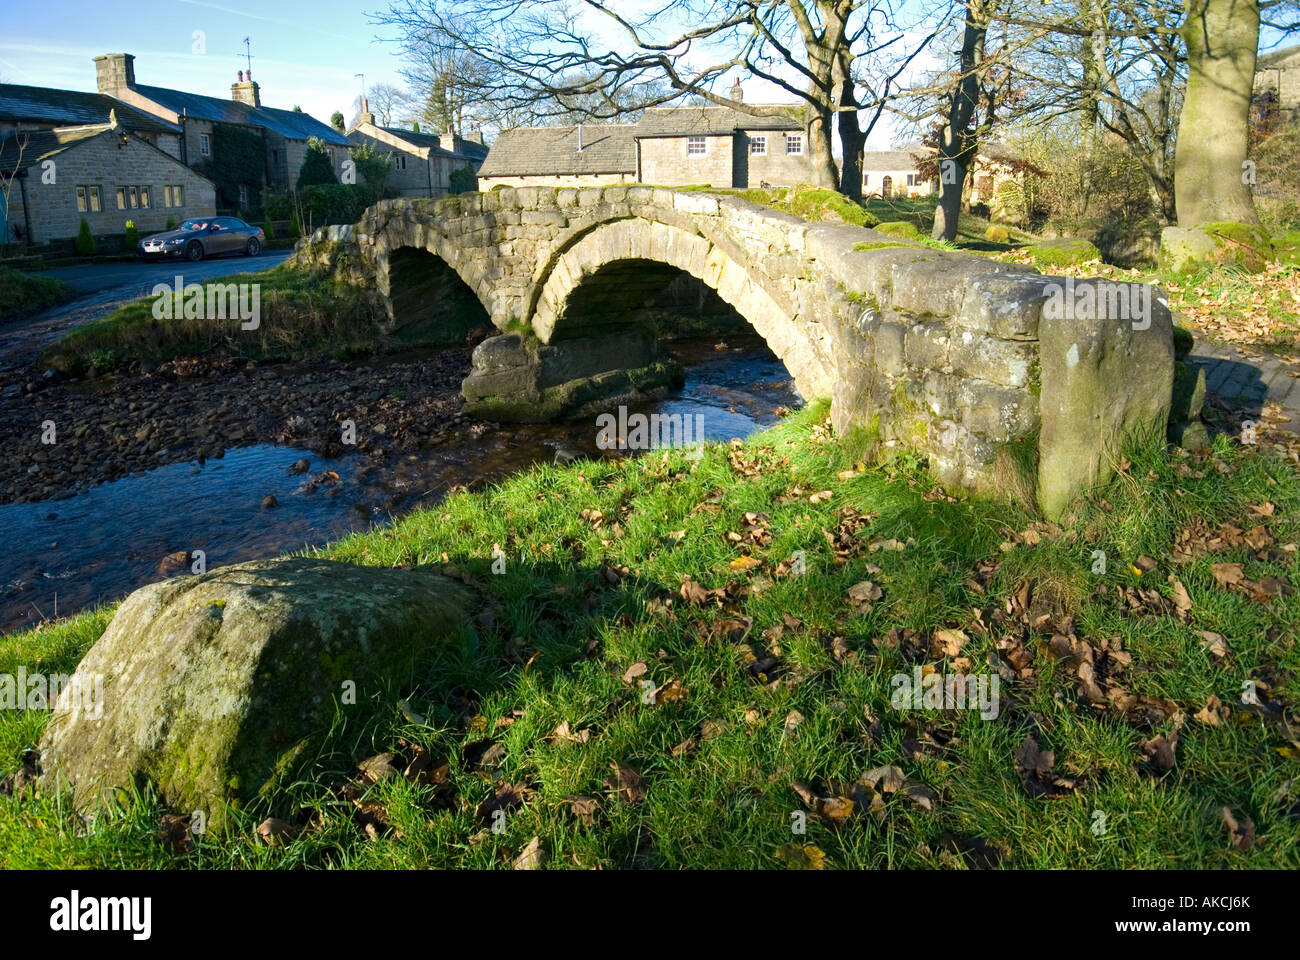 Ancient arched footbridge in the village of Wycoller, near Colne, Lancashire, UK Stock Photo